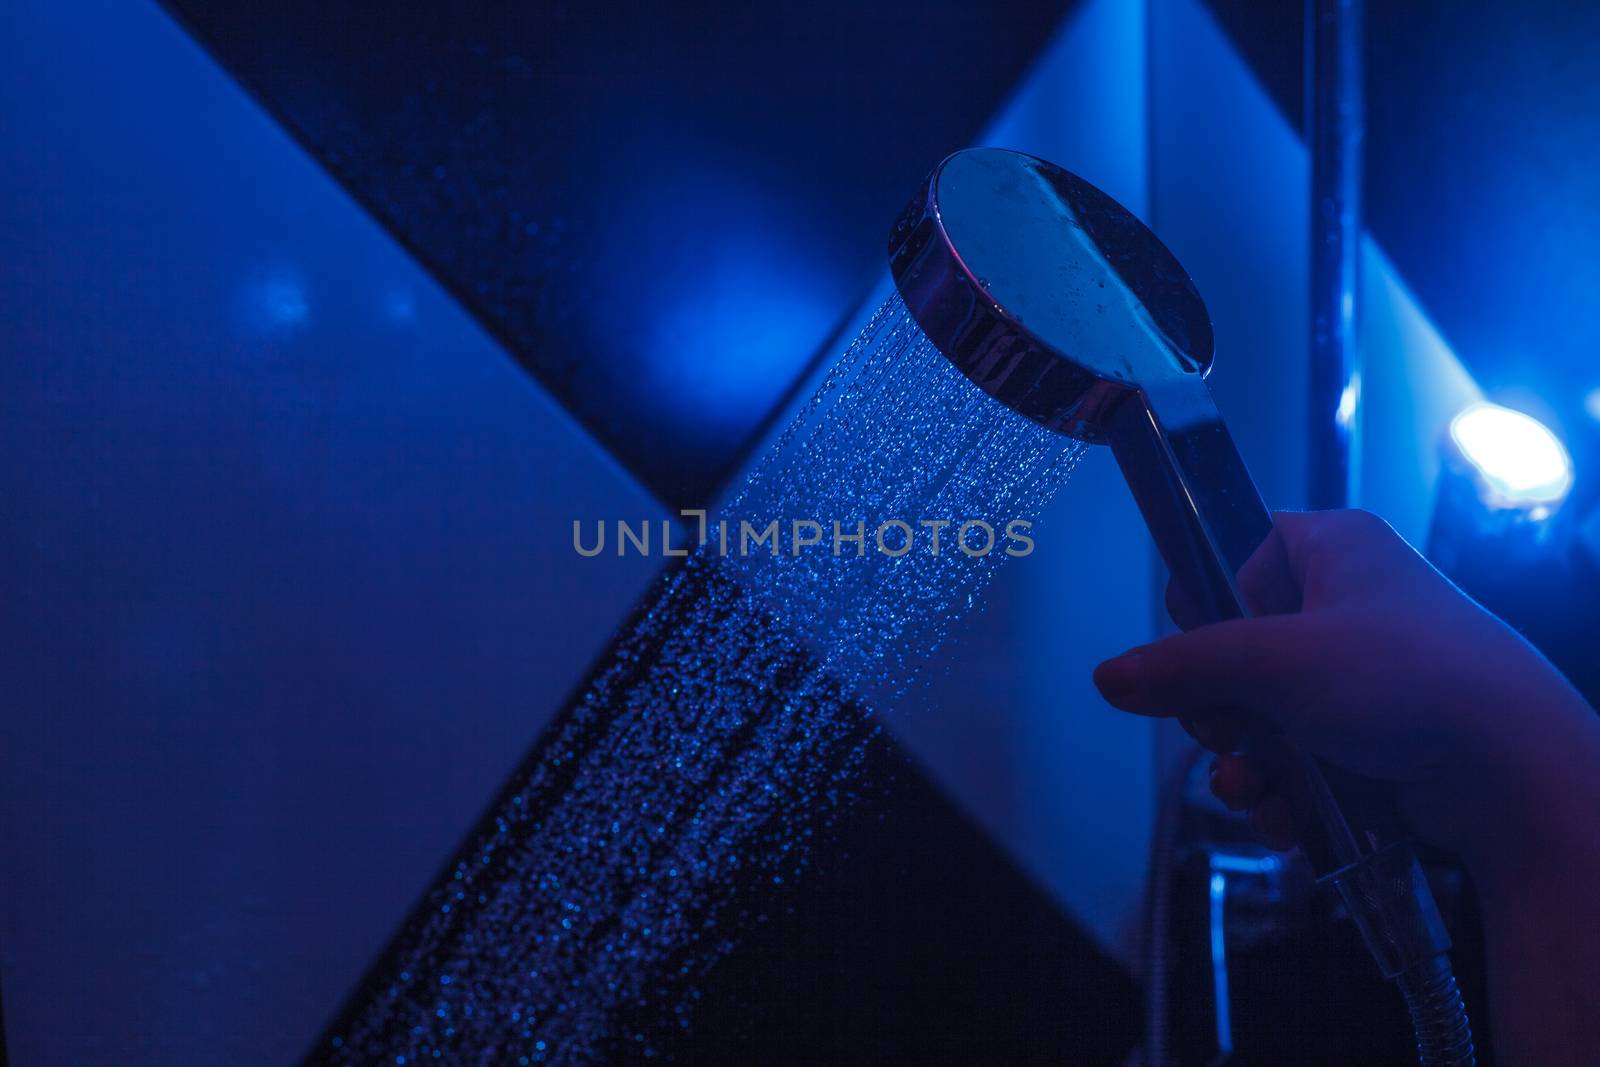 Girl holds a watering can in a shower cabin with blue backlight. Falling drops of water from a watering can.